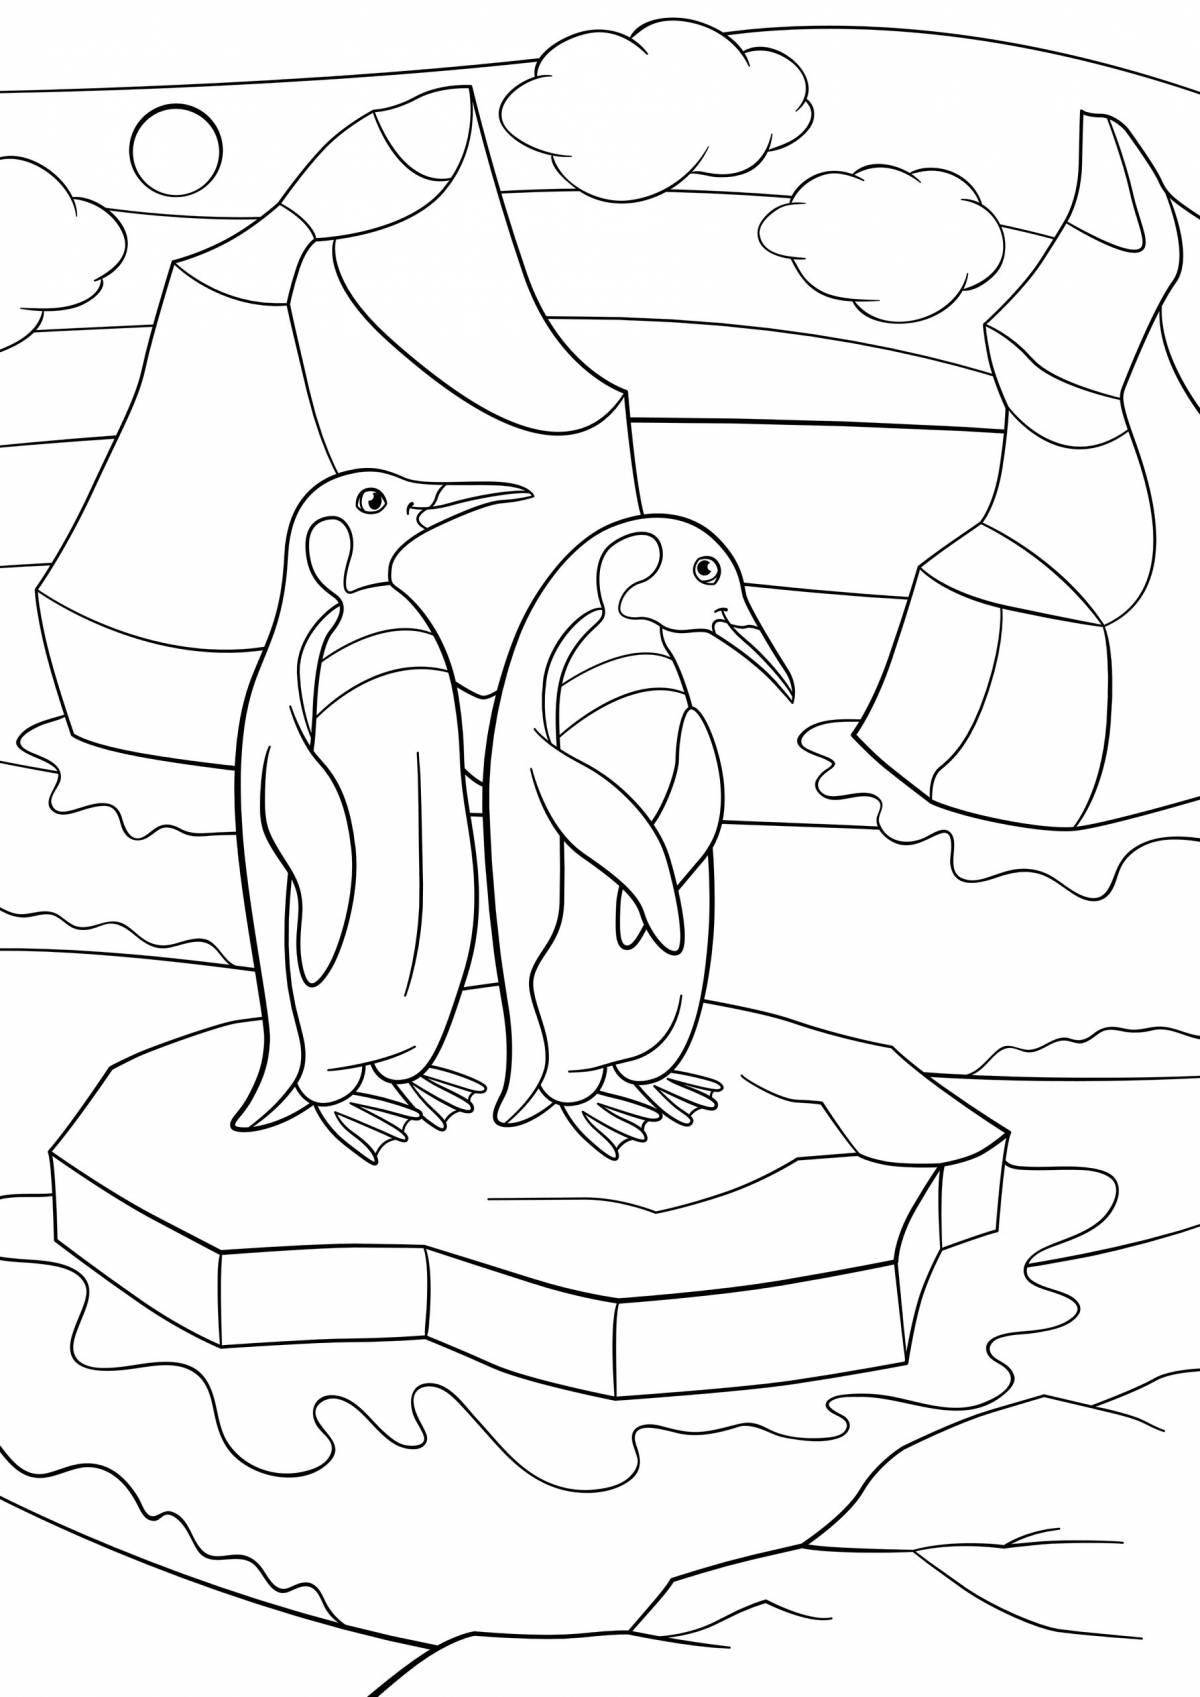 Coloring book funny penguin on an ice floe for children